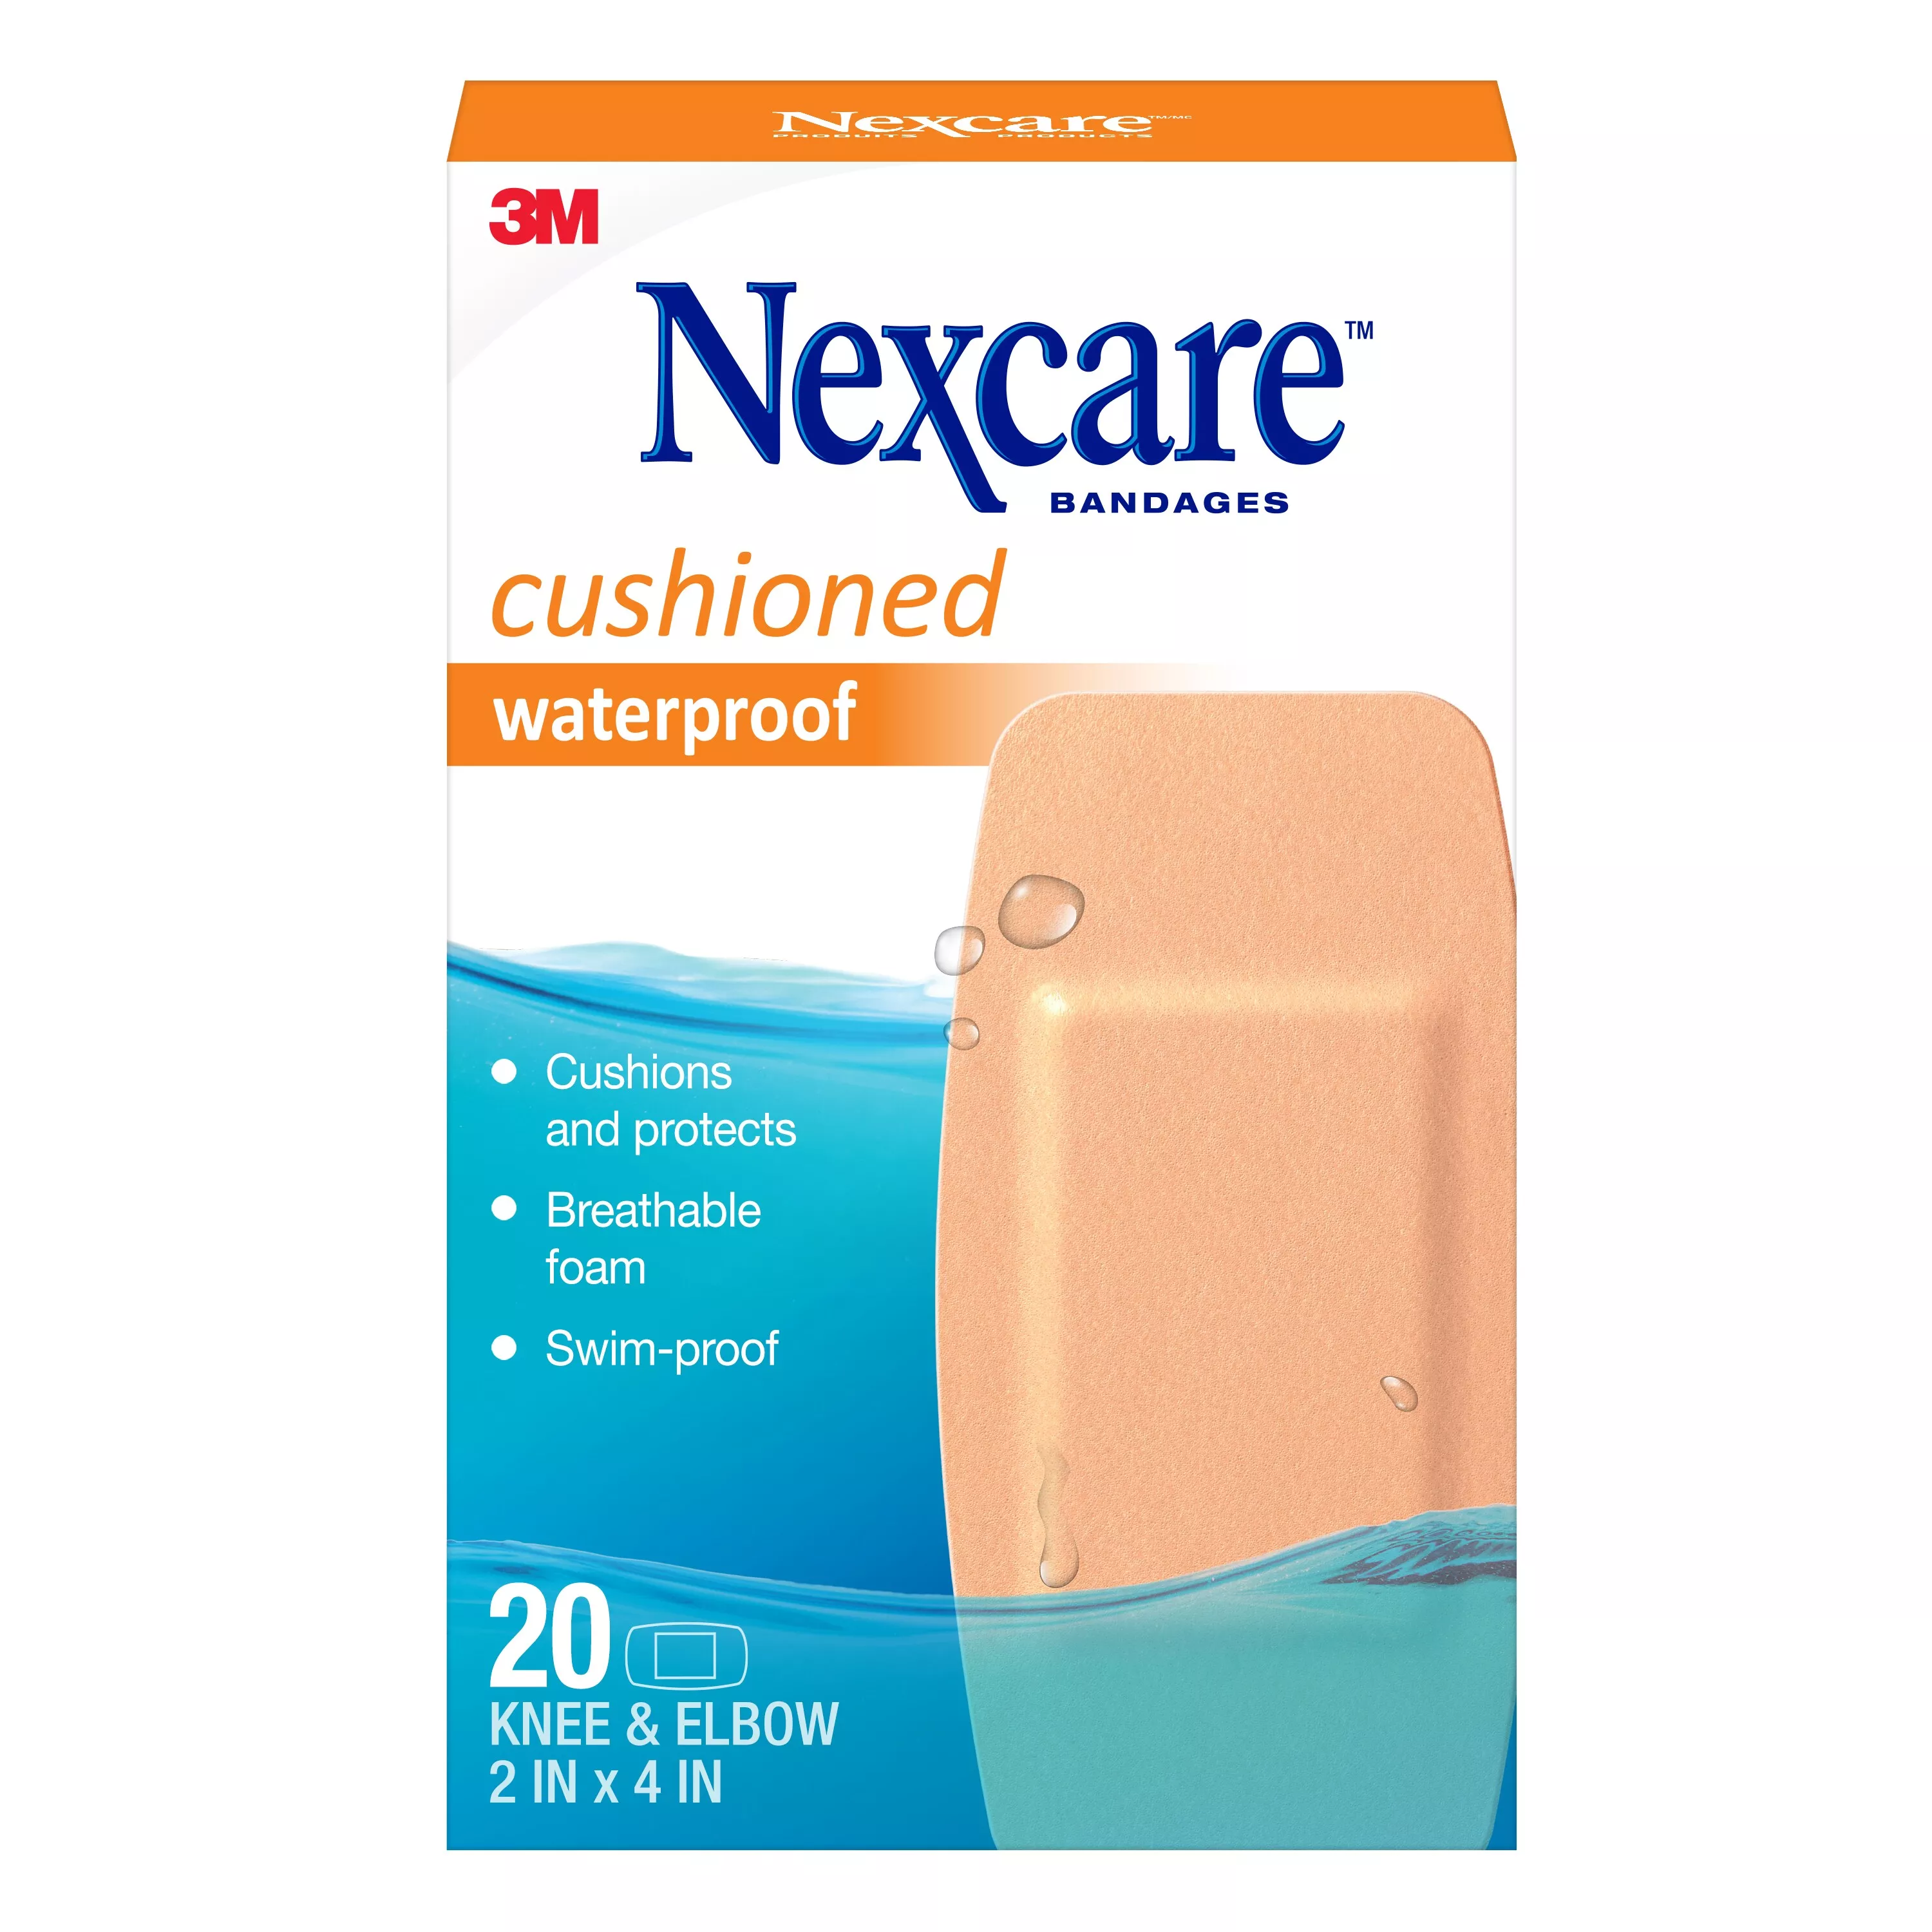 Nexcare™ Waterproof Cushioned Foam Bandages Knee & Elbow 20 ct. 522-20CB-CA, 2 in x 4 in (50 mm x 101 mm)